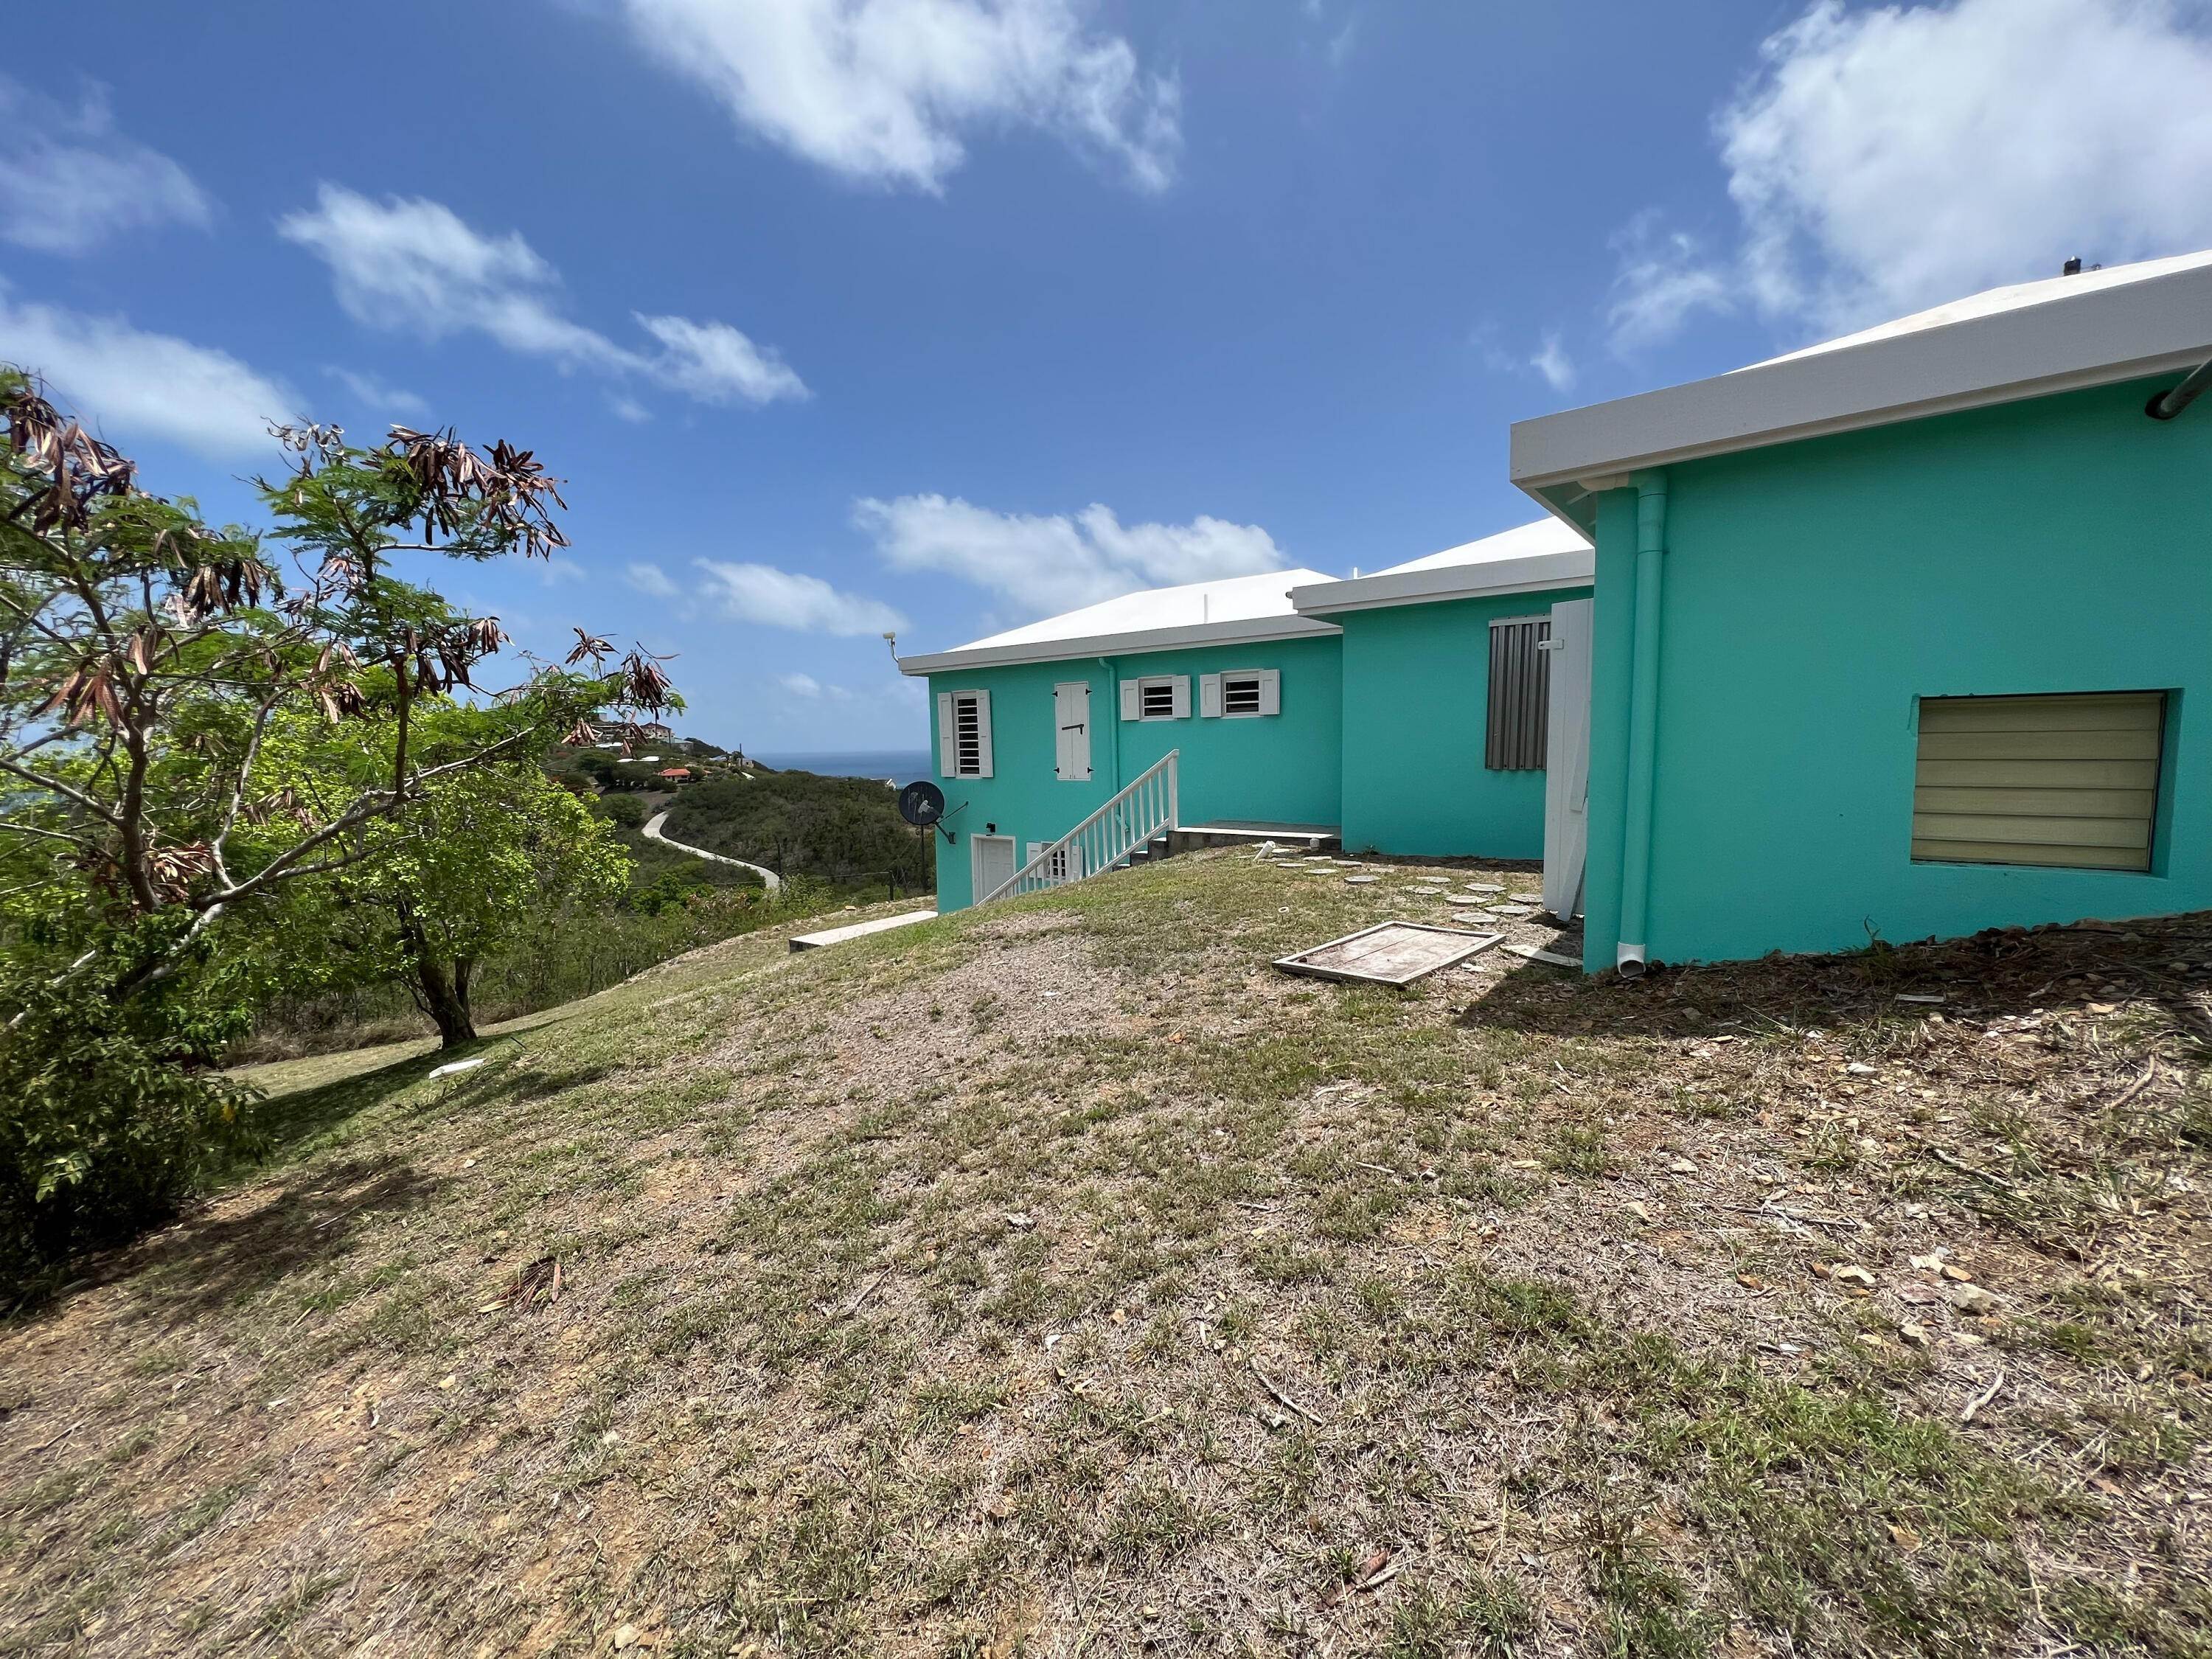 39. Single Family Homes for Sale at 108, 111-A Catherine's Hope EB St Croix, Virgin Islands 00820 United States Virgin Islands